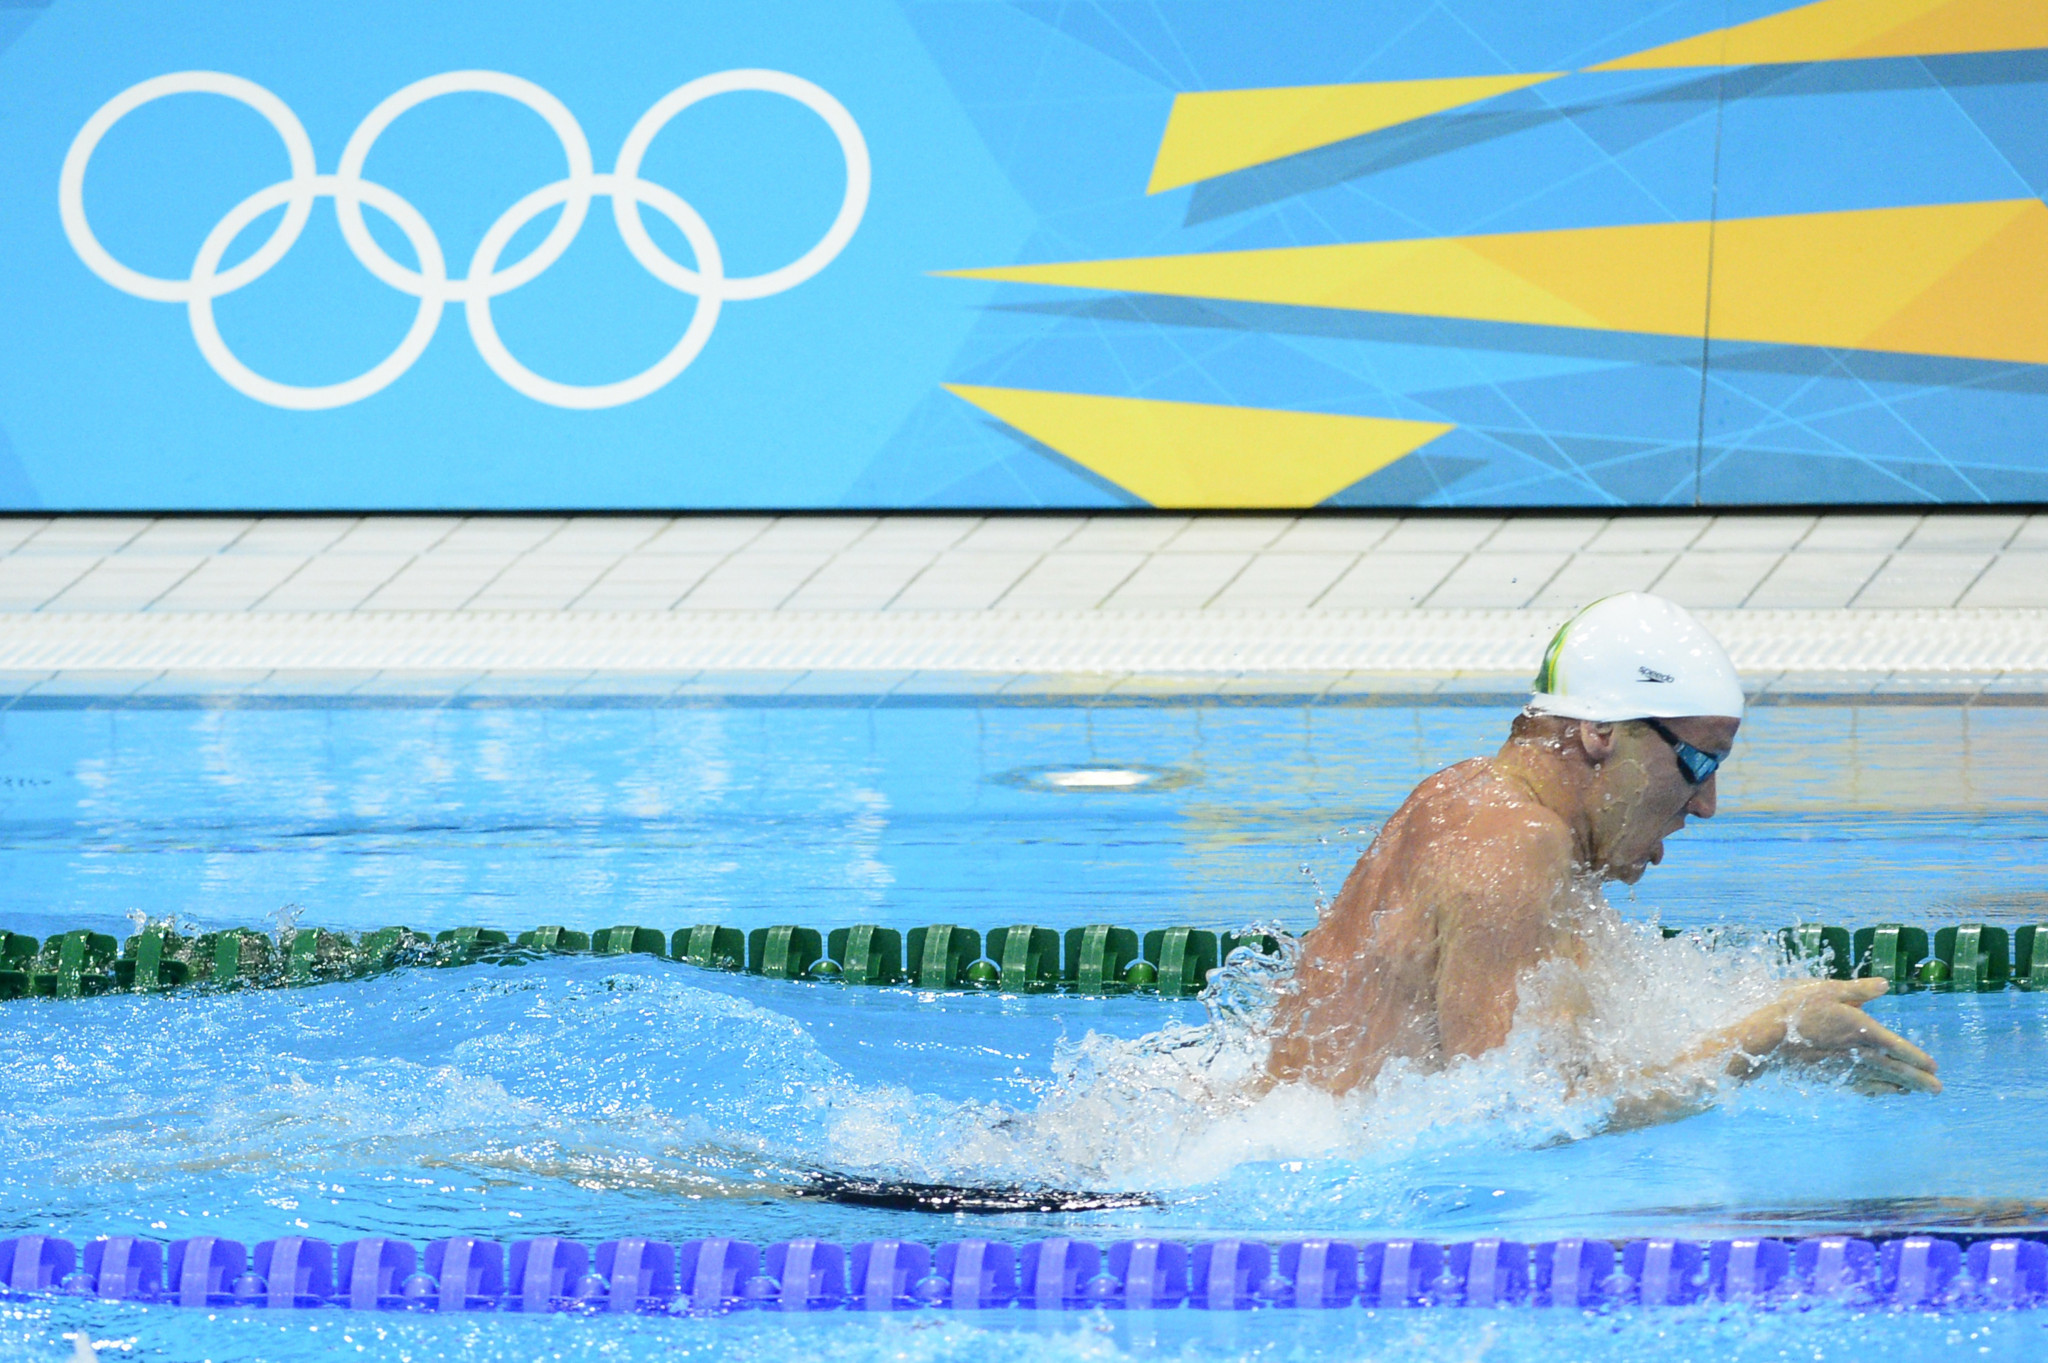 Australian Olympic swimming medal at risk after Rickard reveals positive London 2012 retest